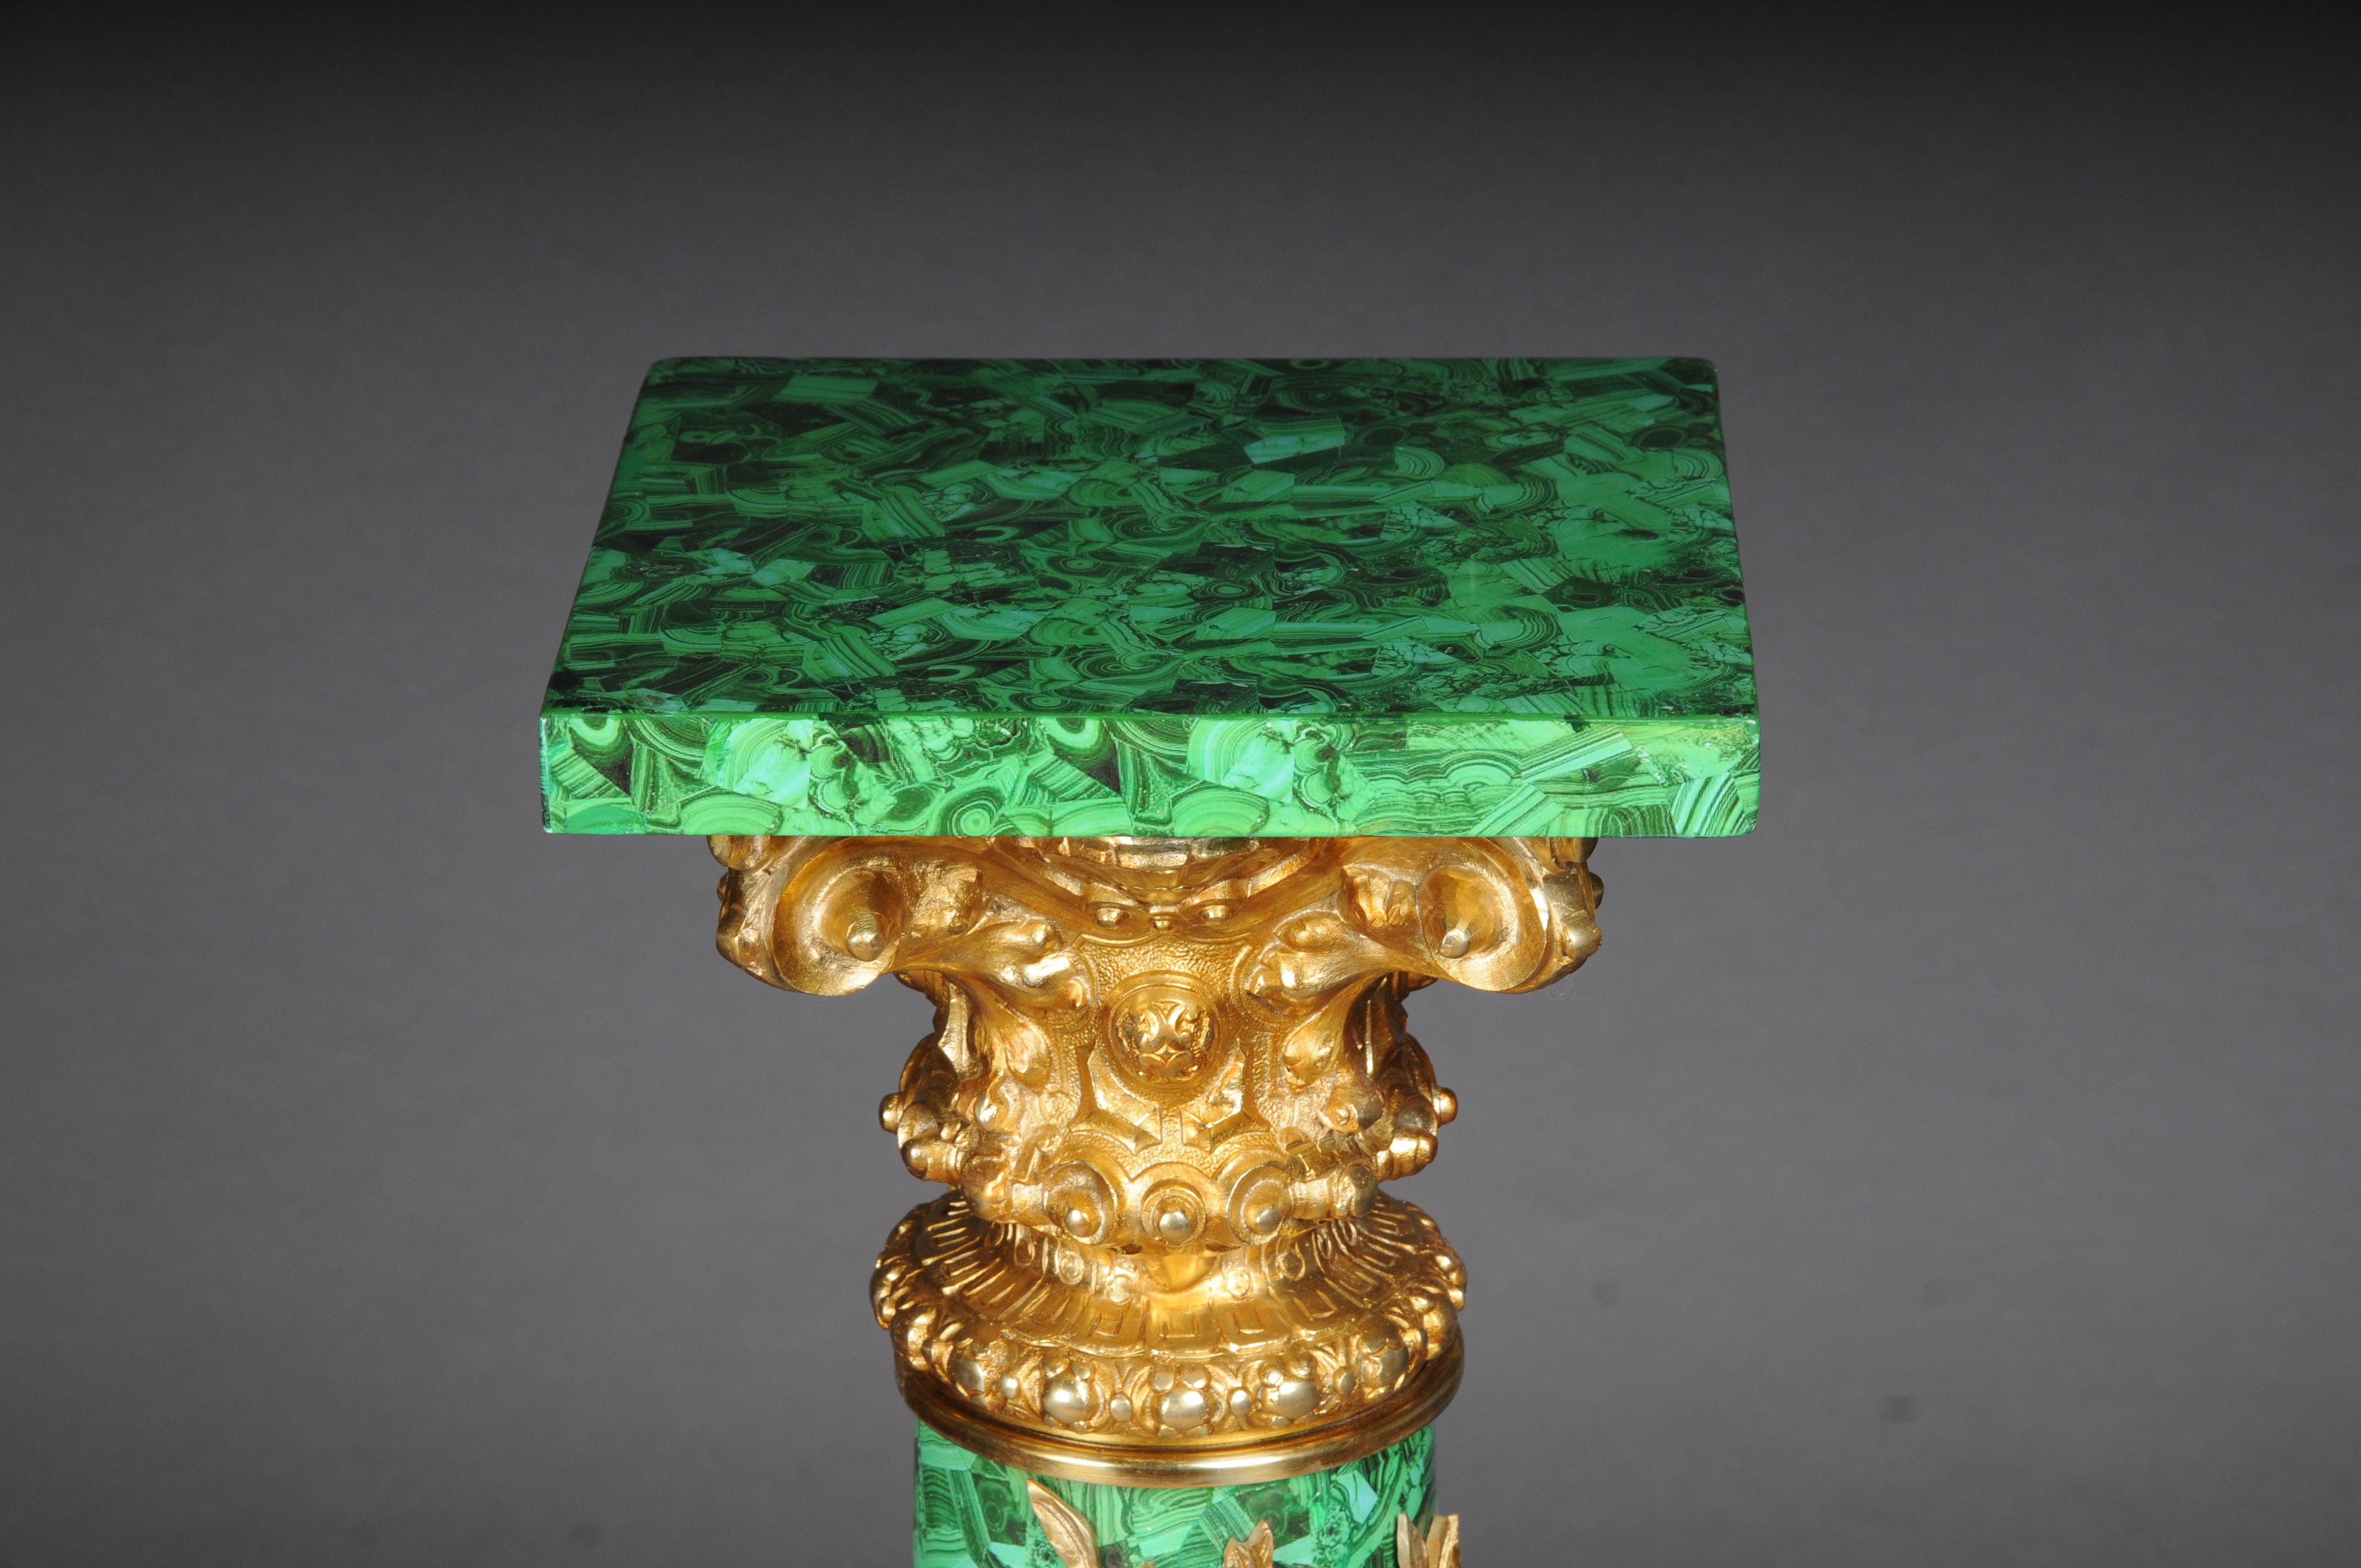 Royal Empire column with malachite and gilt bronze

Impressive and regal wooden column with bronze mounts in Empire style. Solid wood coated with malachite painting technique. Such a column is guaranteed to be a real eye-catcher and something very